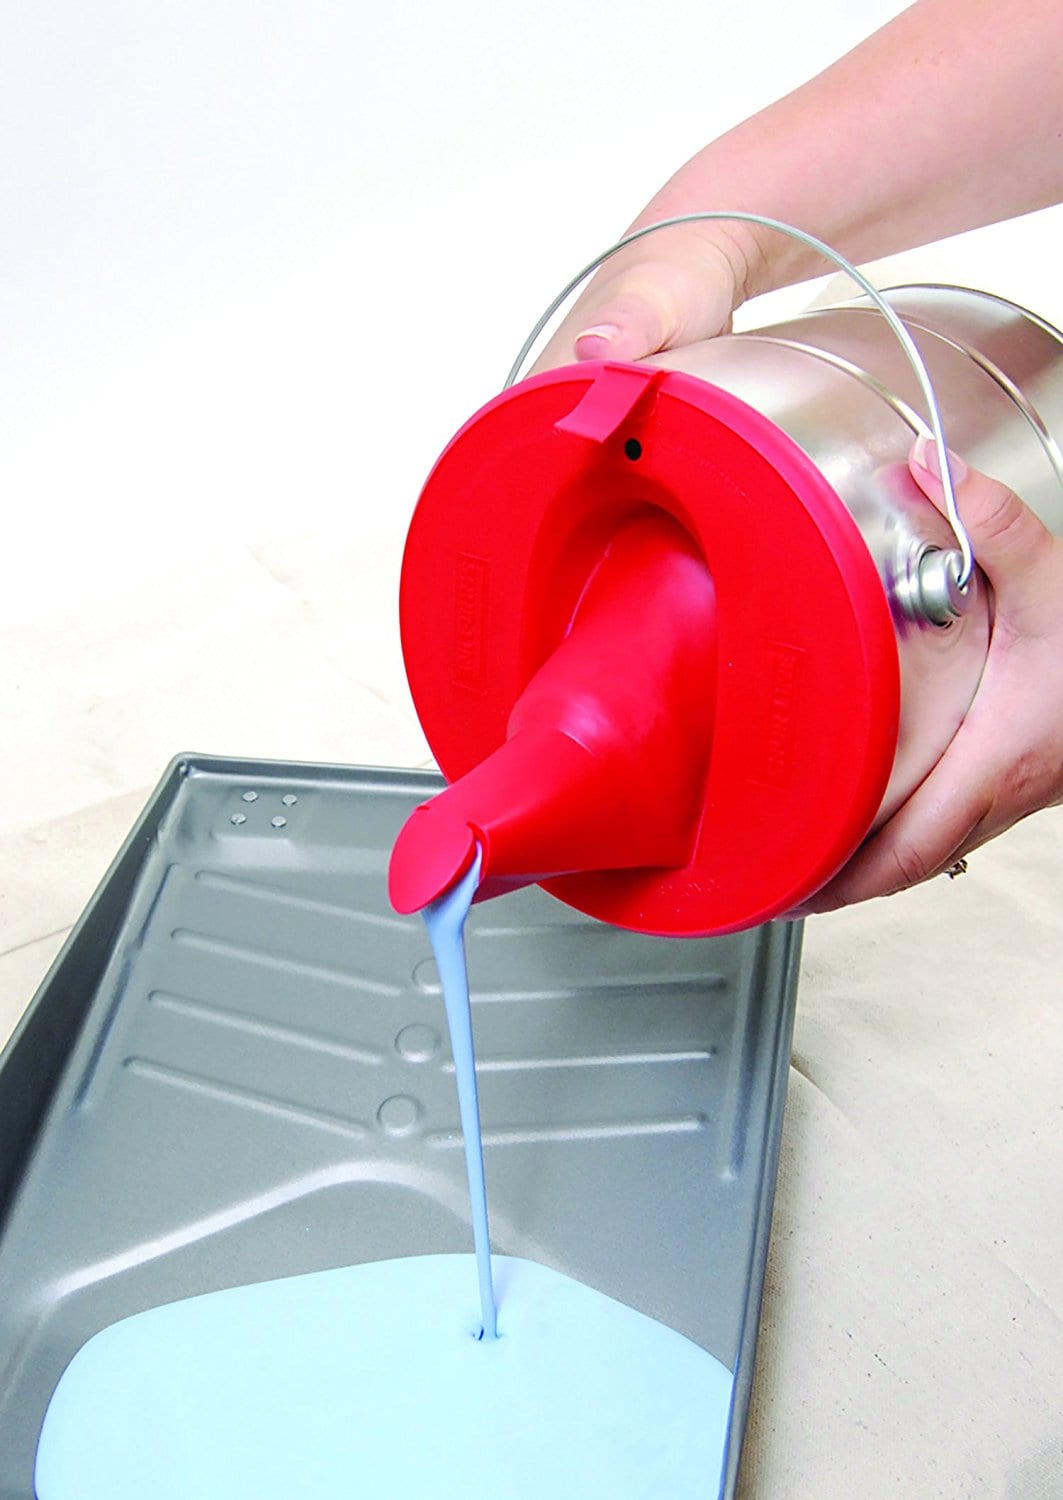 Fits-All™ Paint Can Spout - Sherwin-Williams